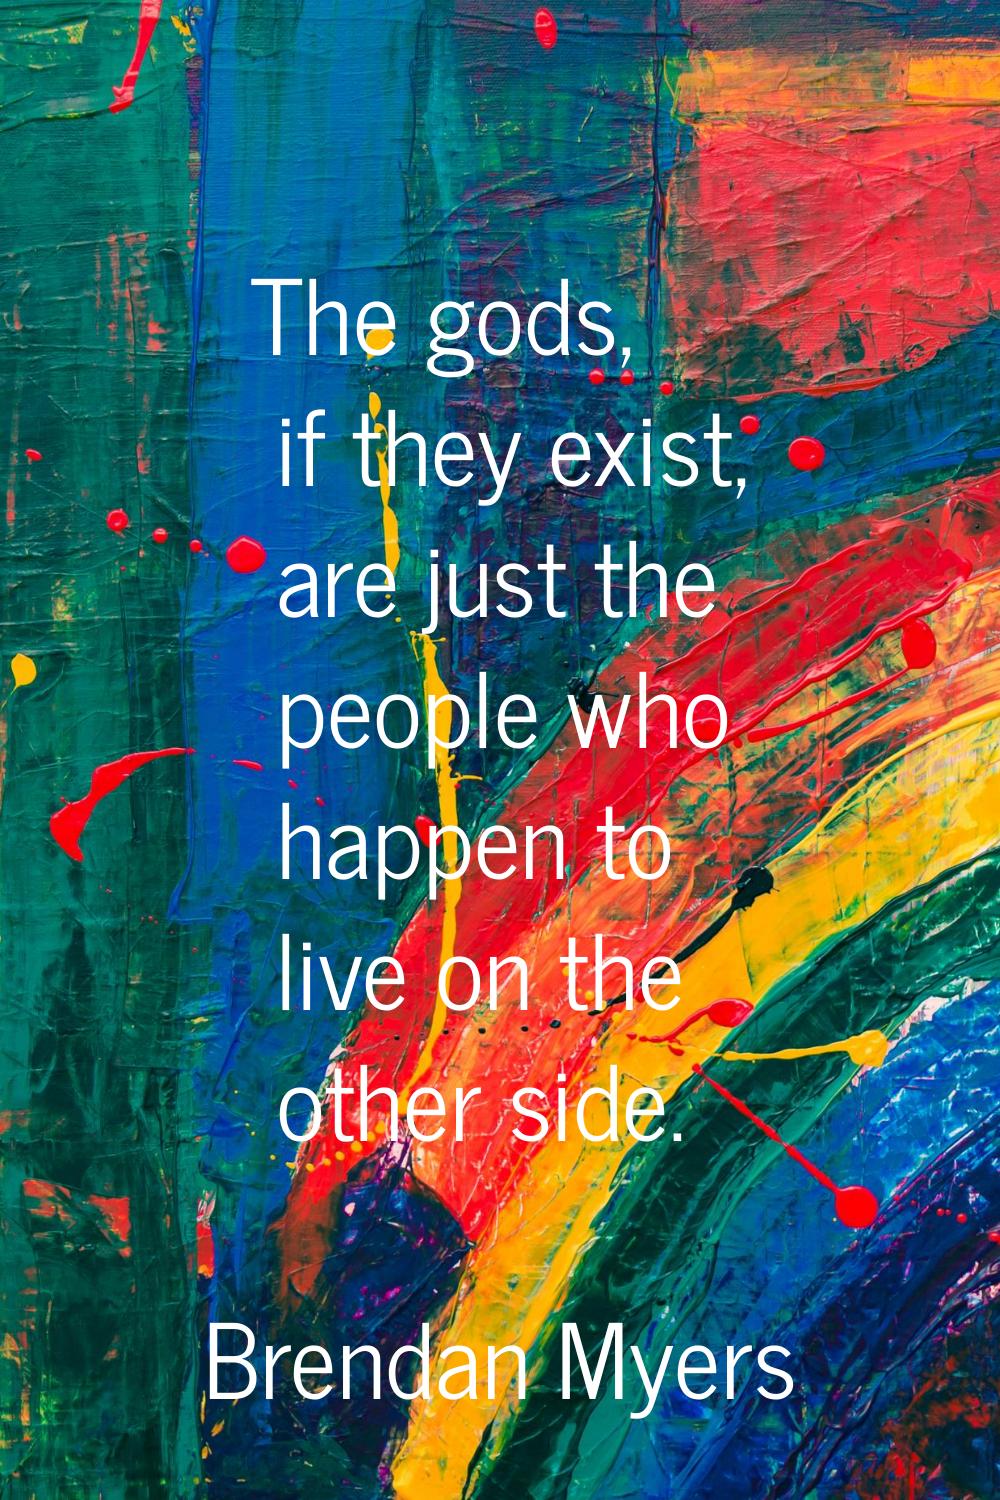 The gods, if they exist, are just the people who happen to live on the other side.